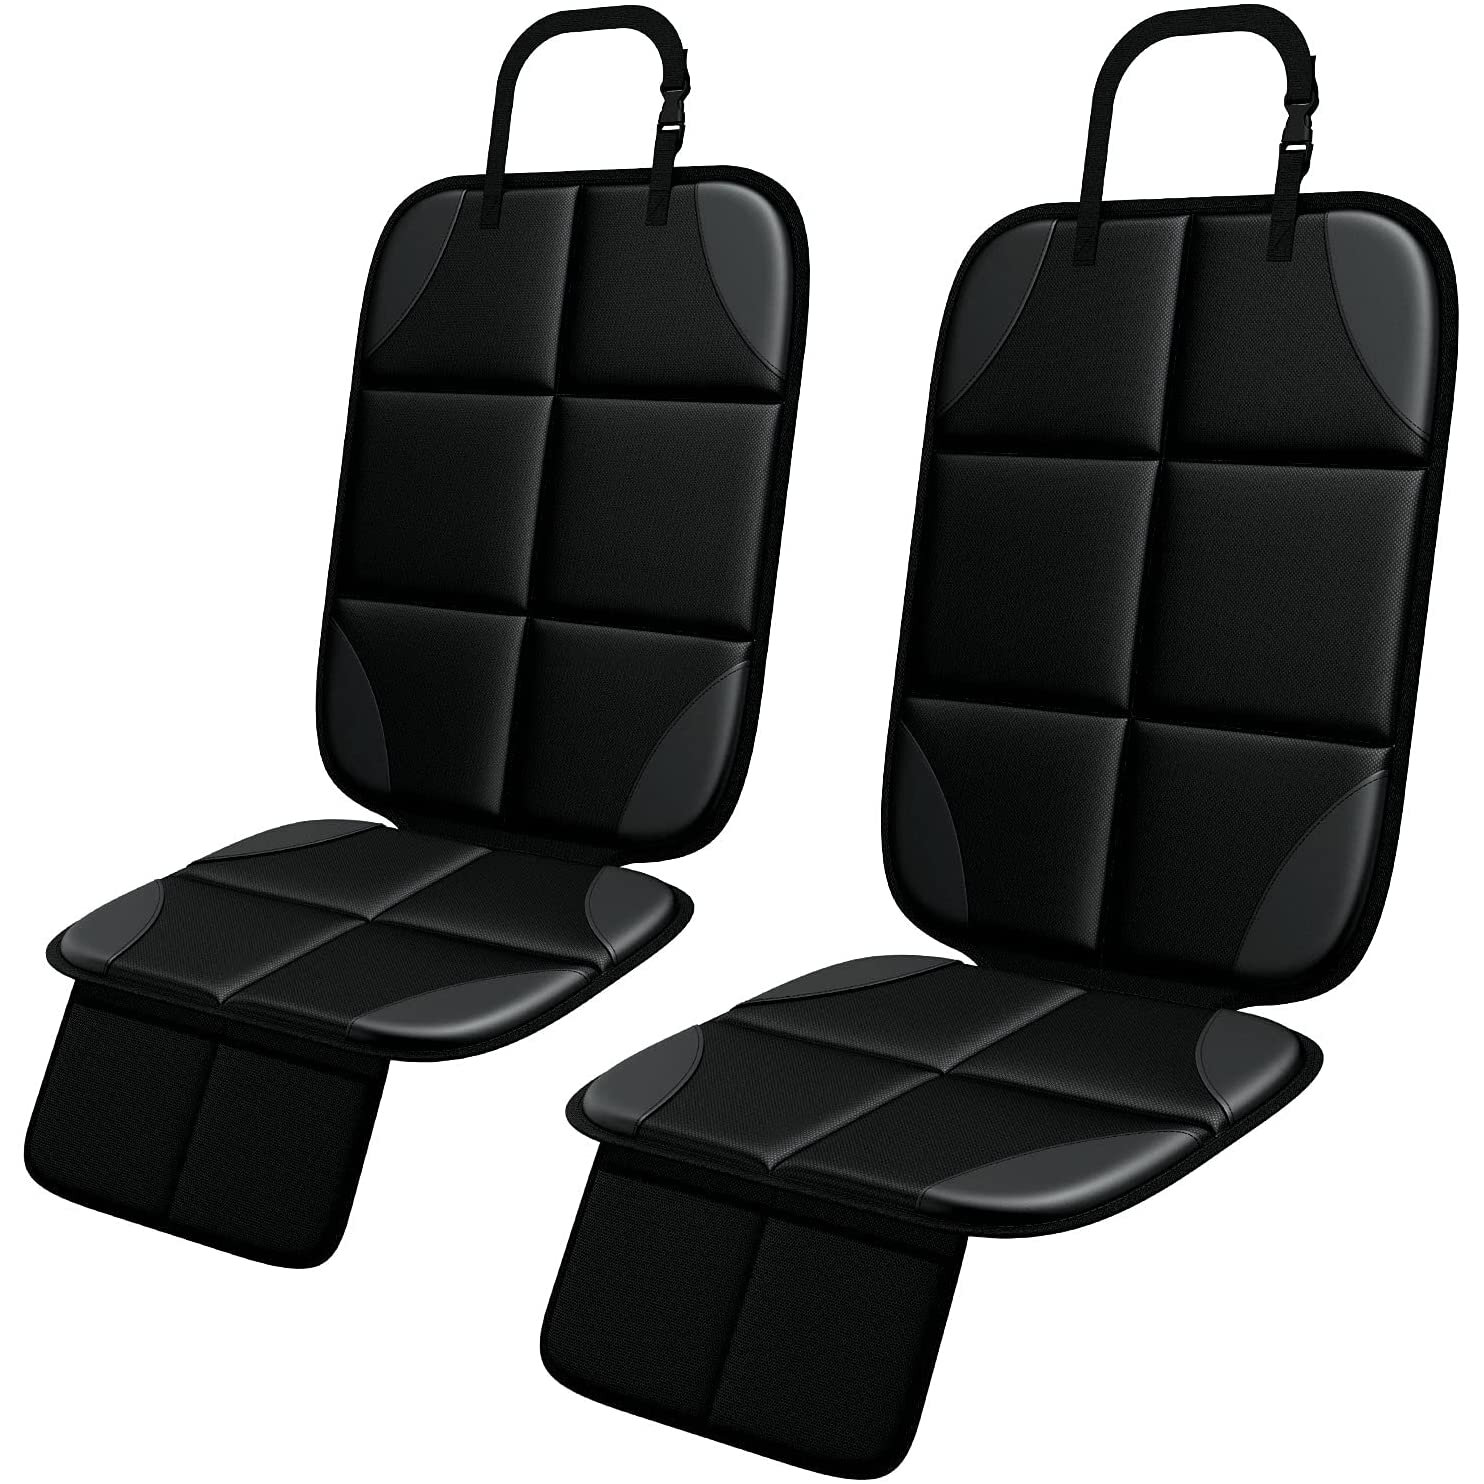 Car Seat Protector, 2 Pack Car Seat Protectors for Child Seats, Non-Slip Easy Cleaning Baby Car Back Seat Protector, ISOFIX Compatible(Black)